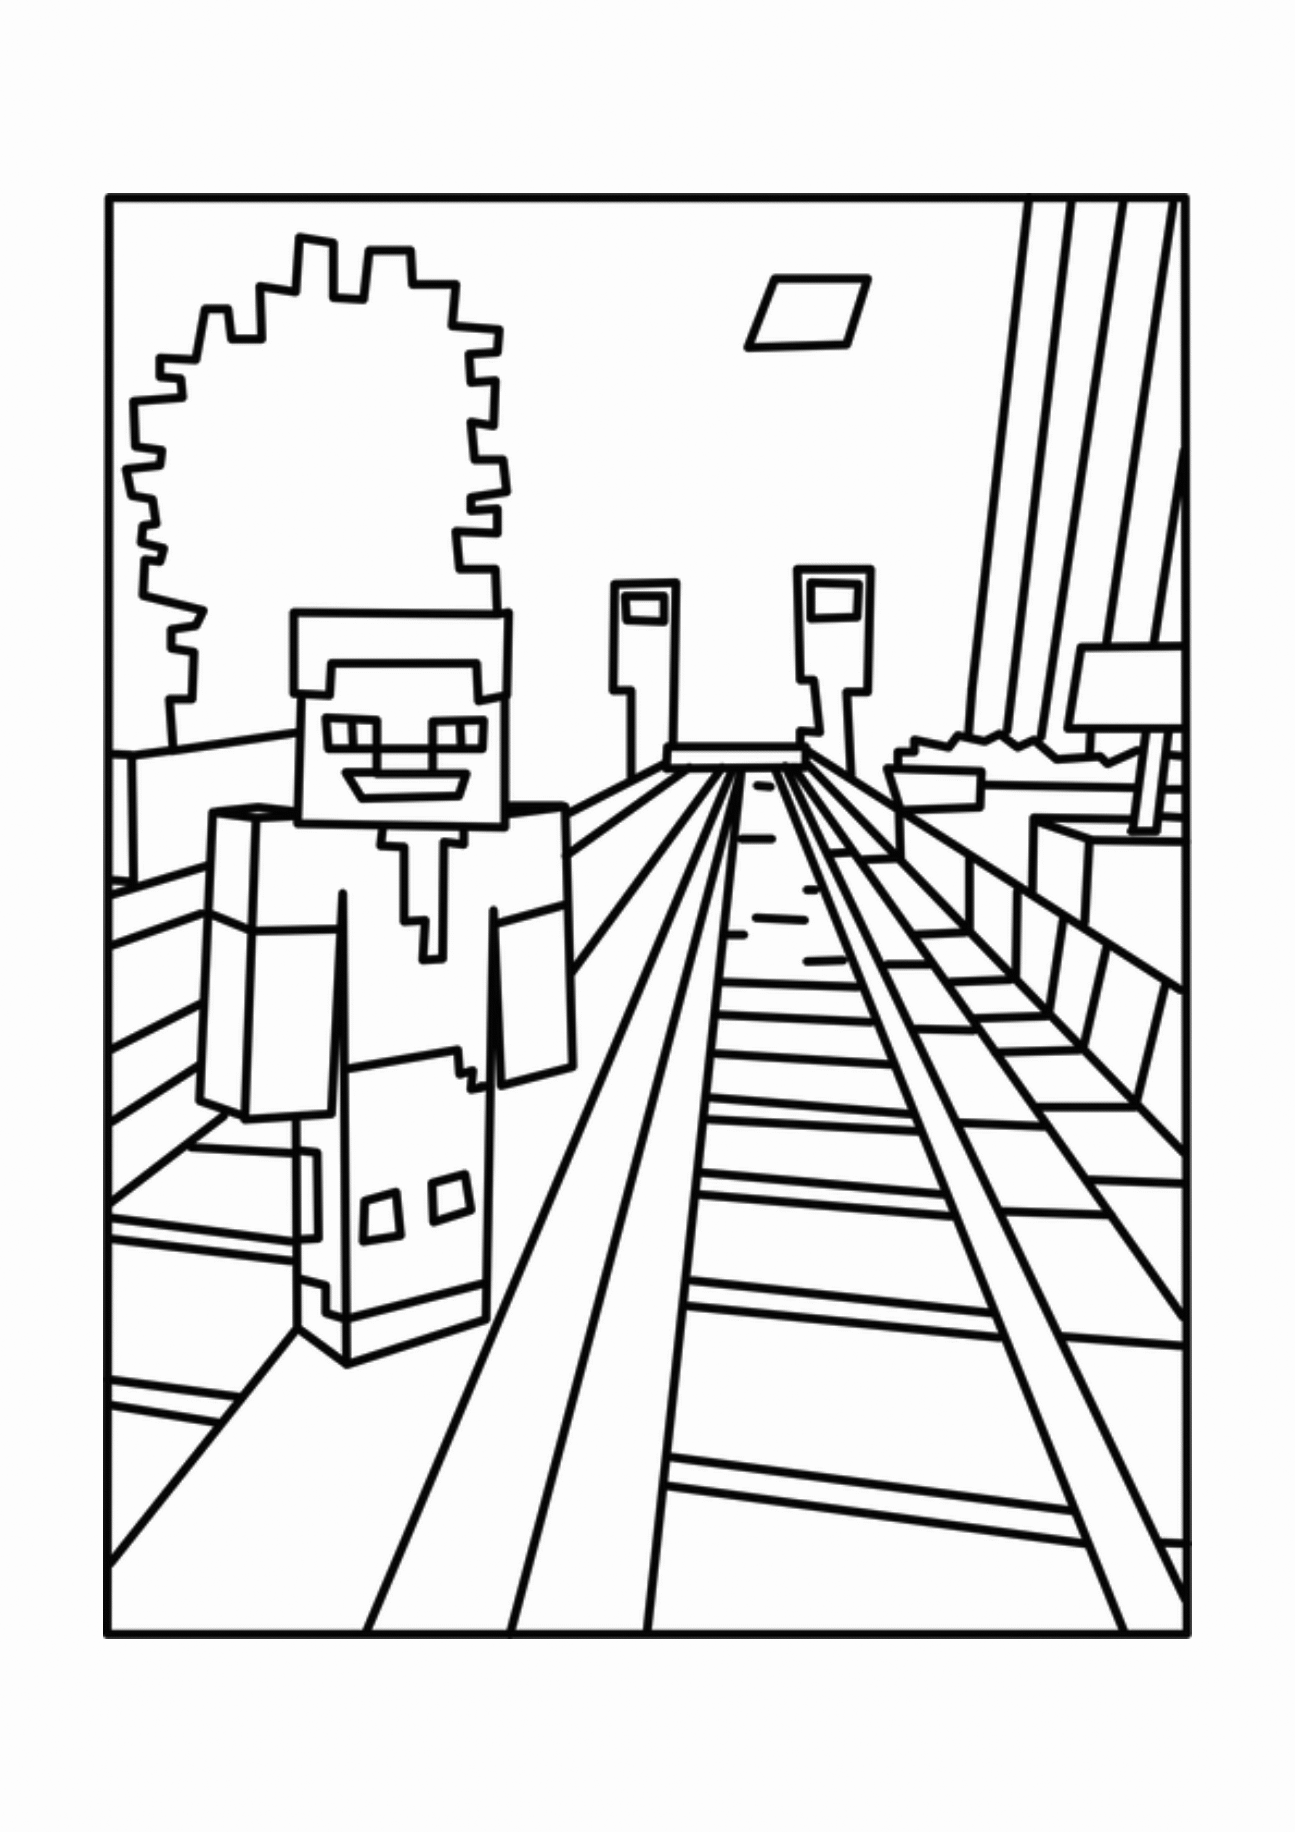 Download Minecraft Coloring Pages Best Coloring Pages For Kids